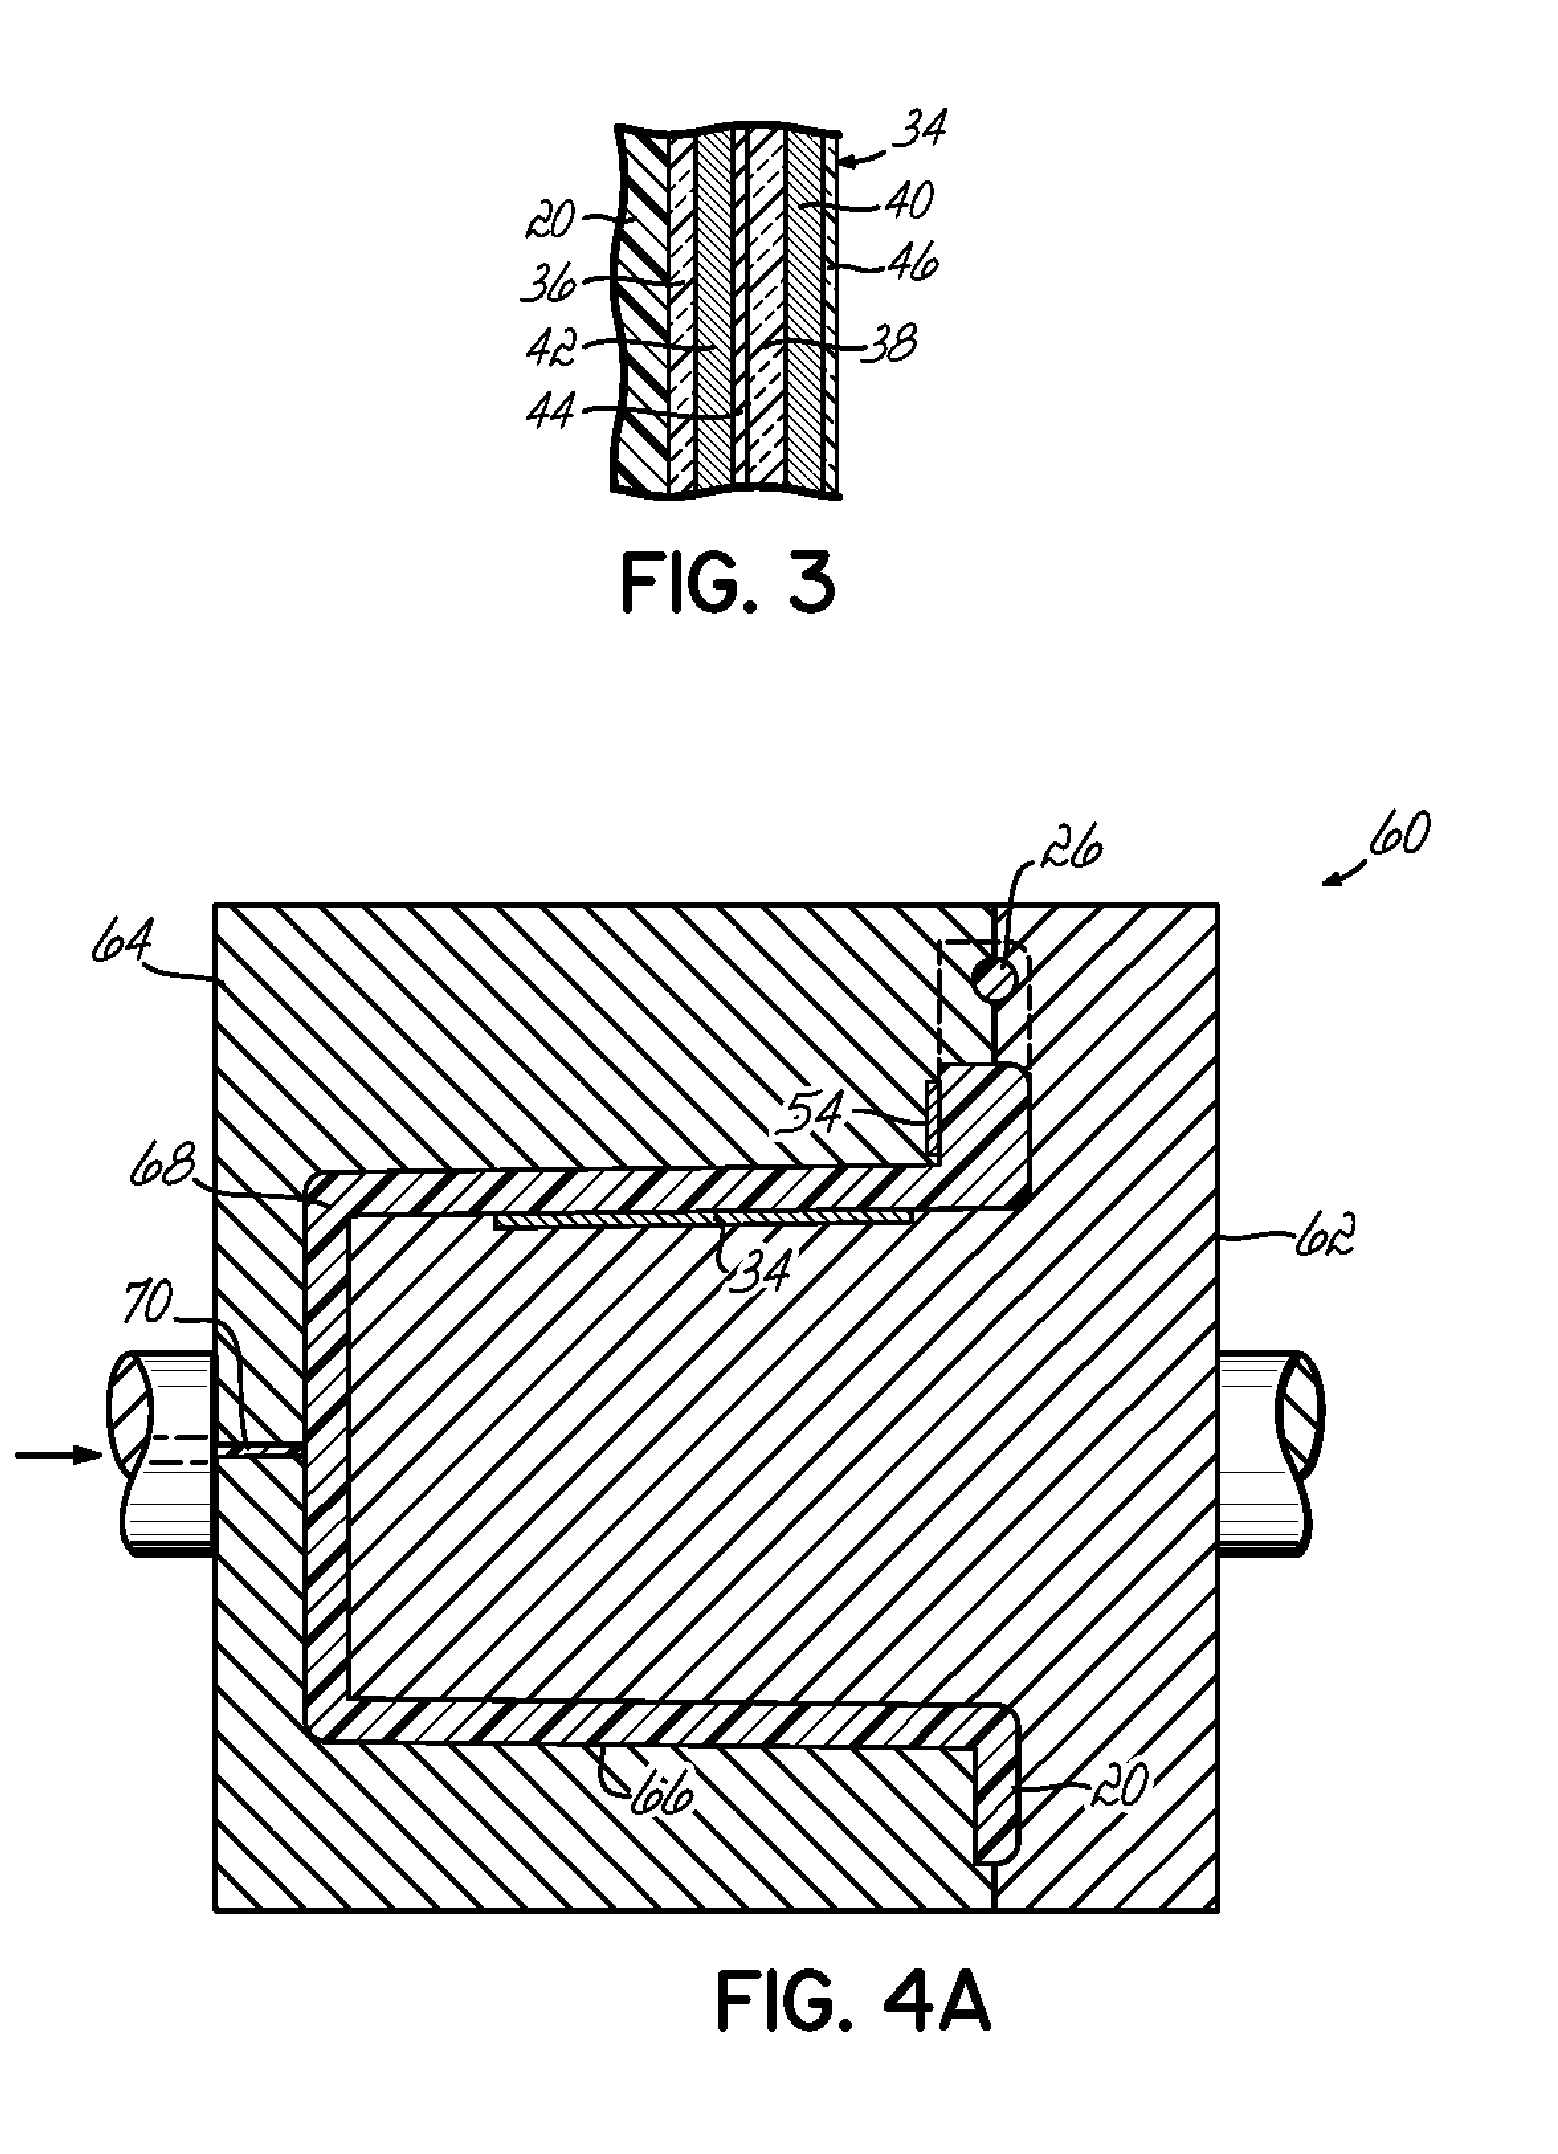 Automotive ashtray having an electroluminescent lamp and method of making the same